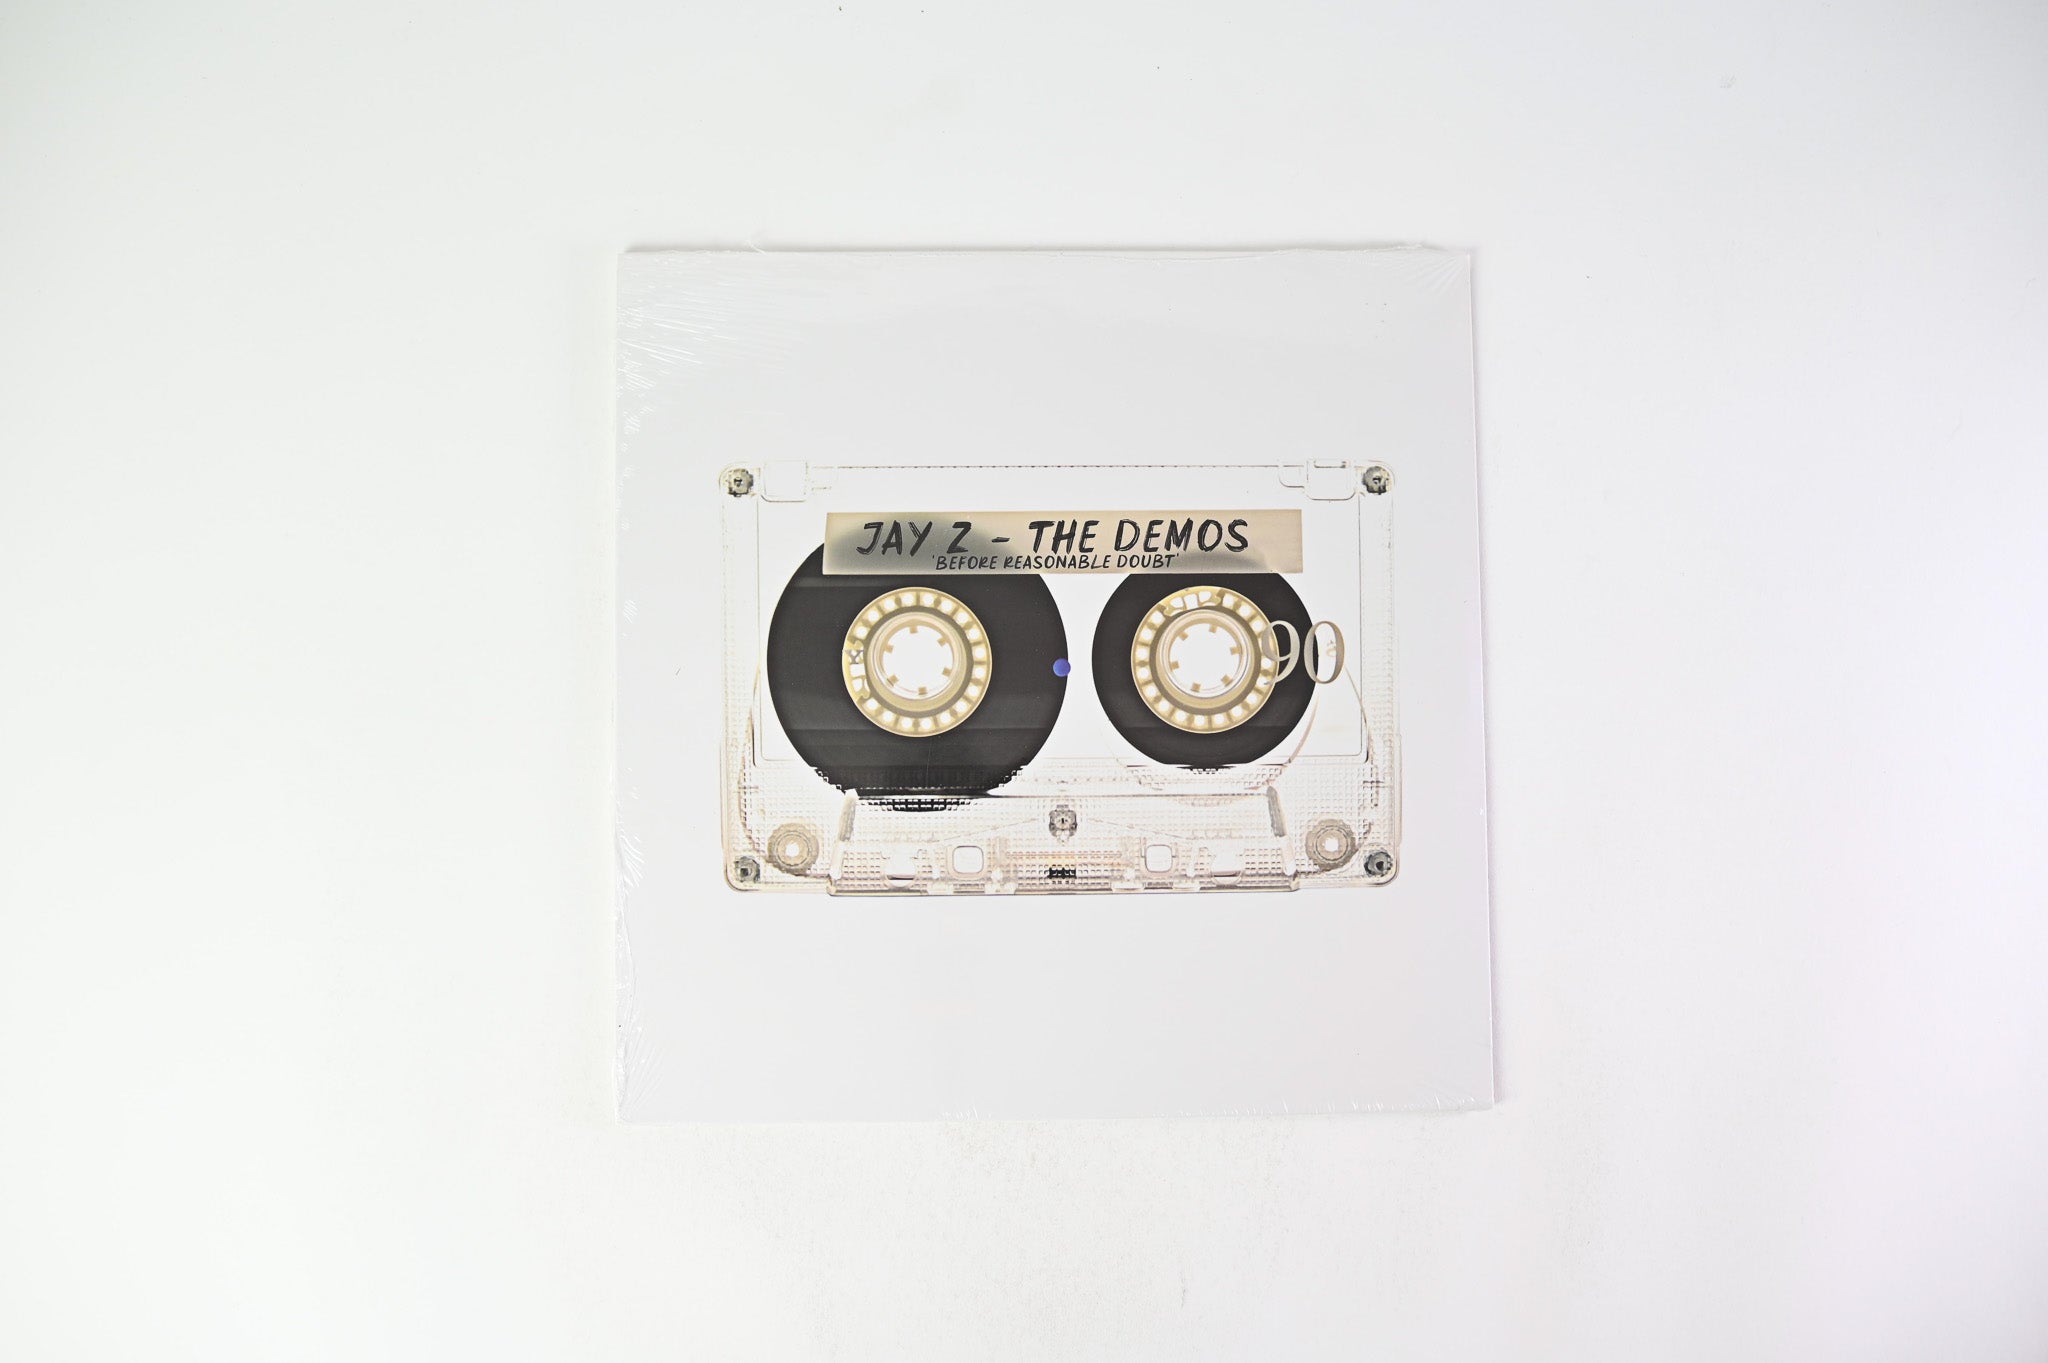 Jay-Z - The Demos Unofficial Pressing Sealed